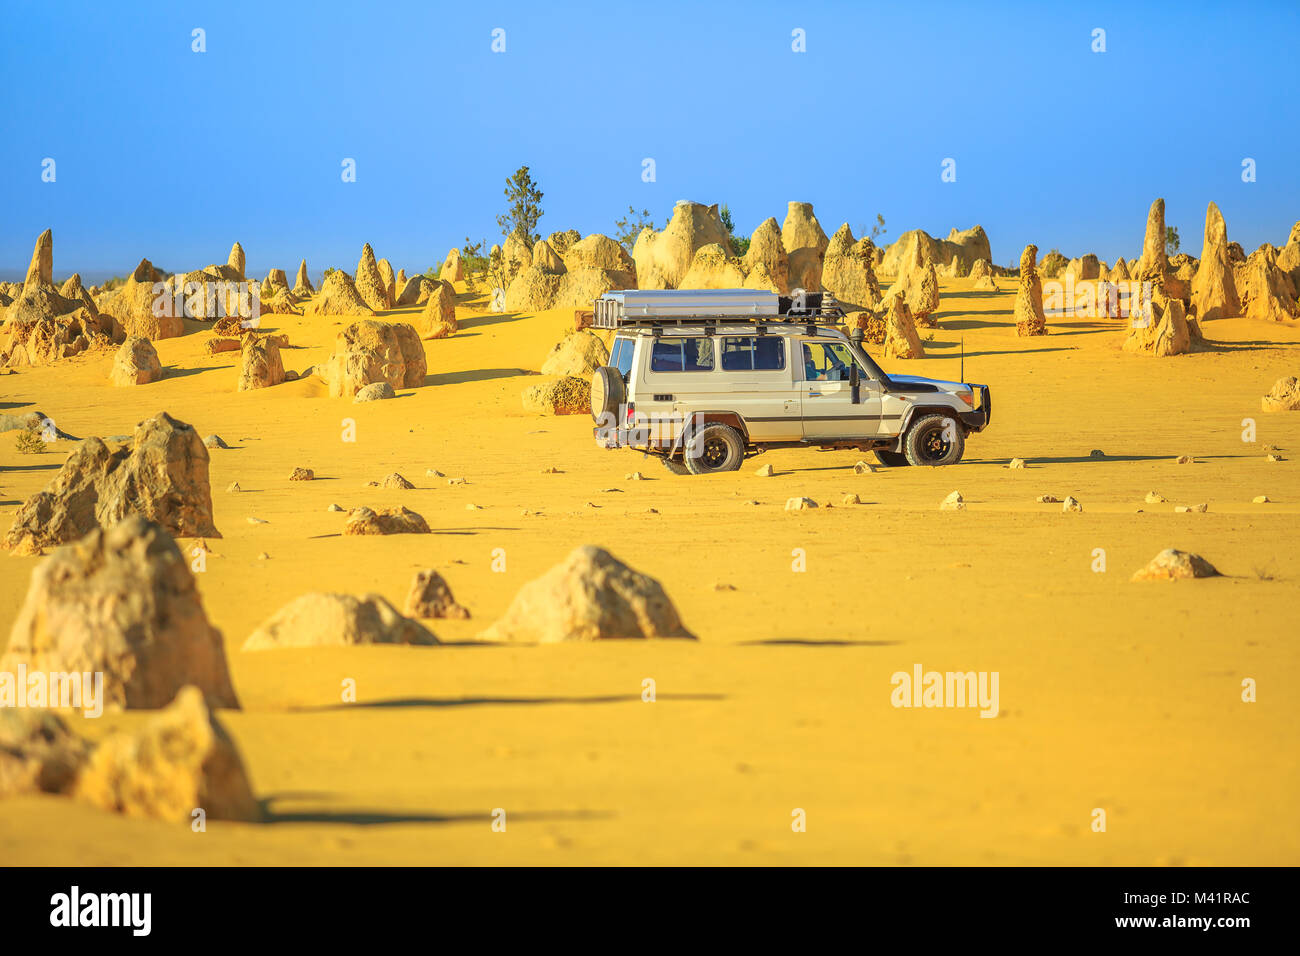 Four-wheel-drive car on Pinnacles Drive, dirt road in Pinnacles Desert, Nambung National Park, Western Australia. Discovery and adventure travel concept. Stock Photo